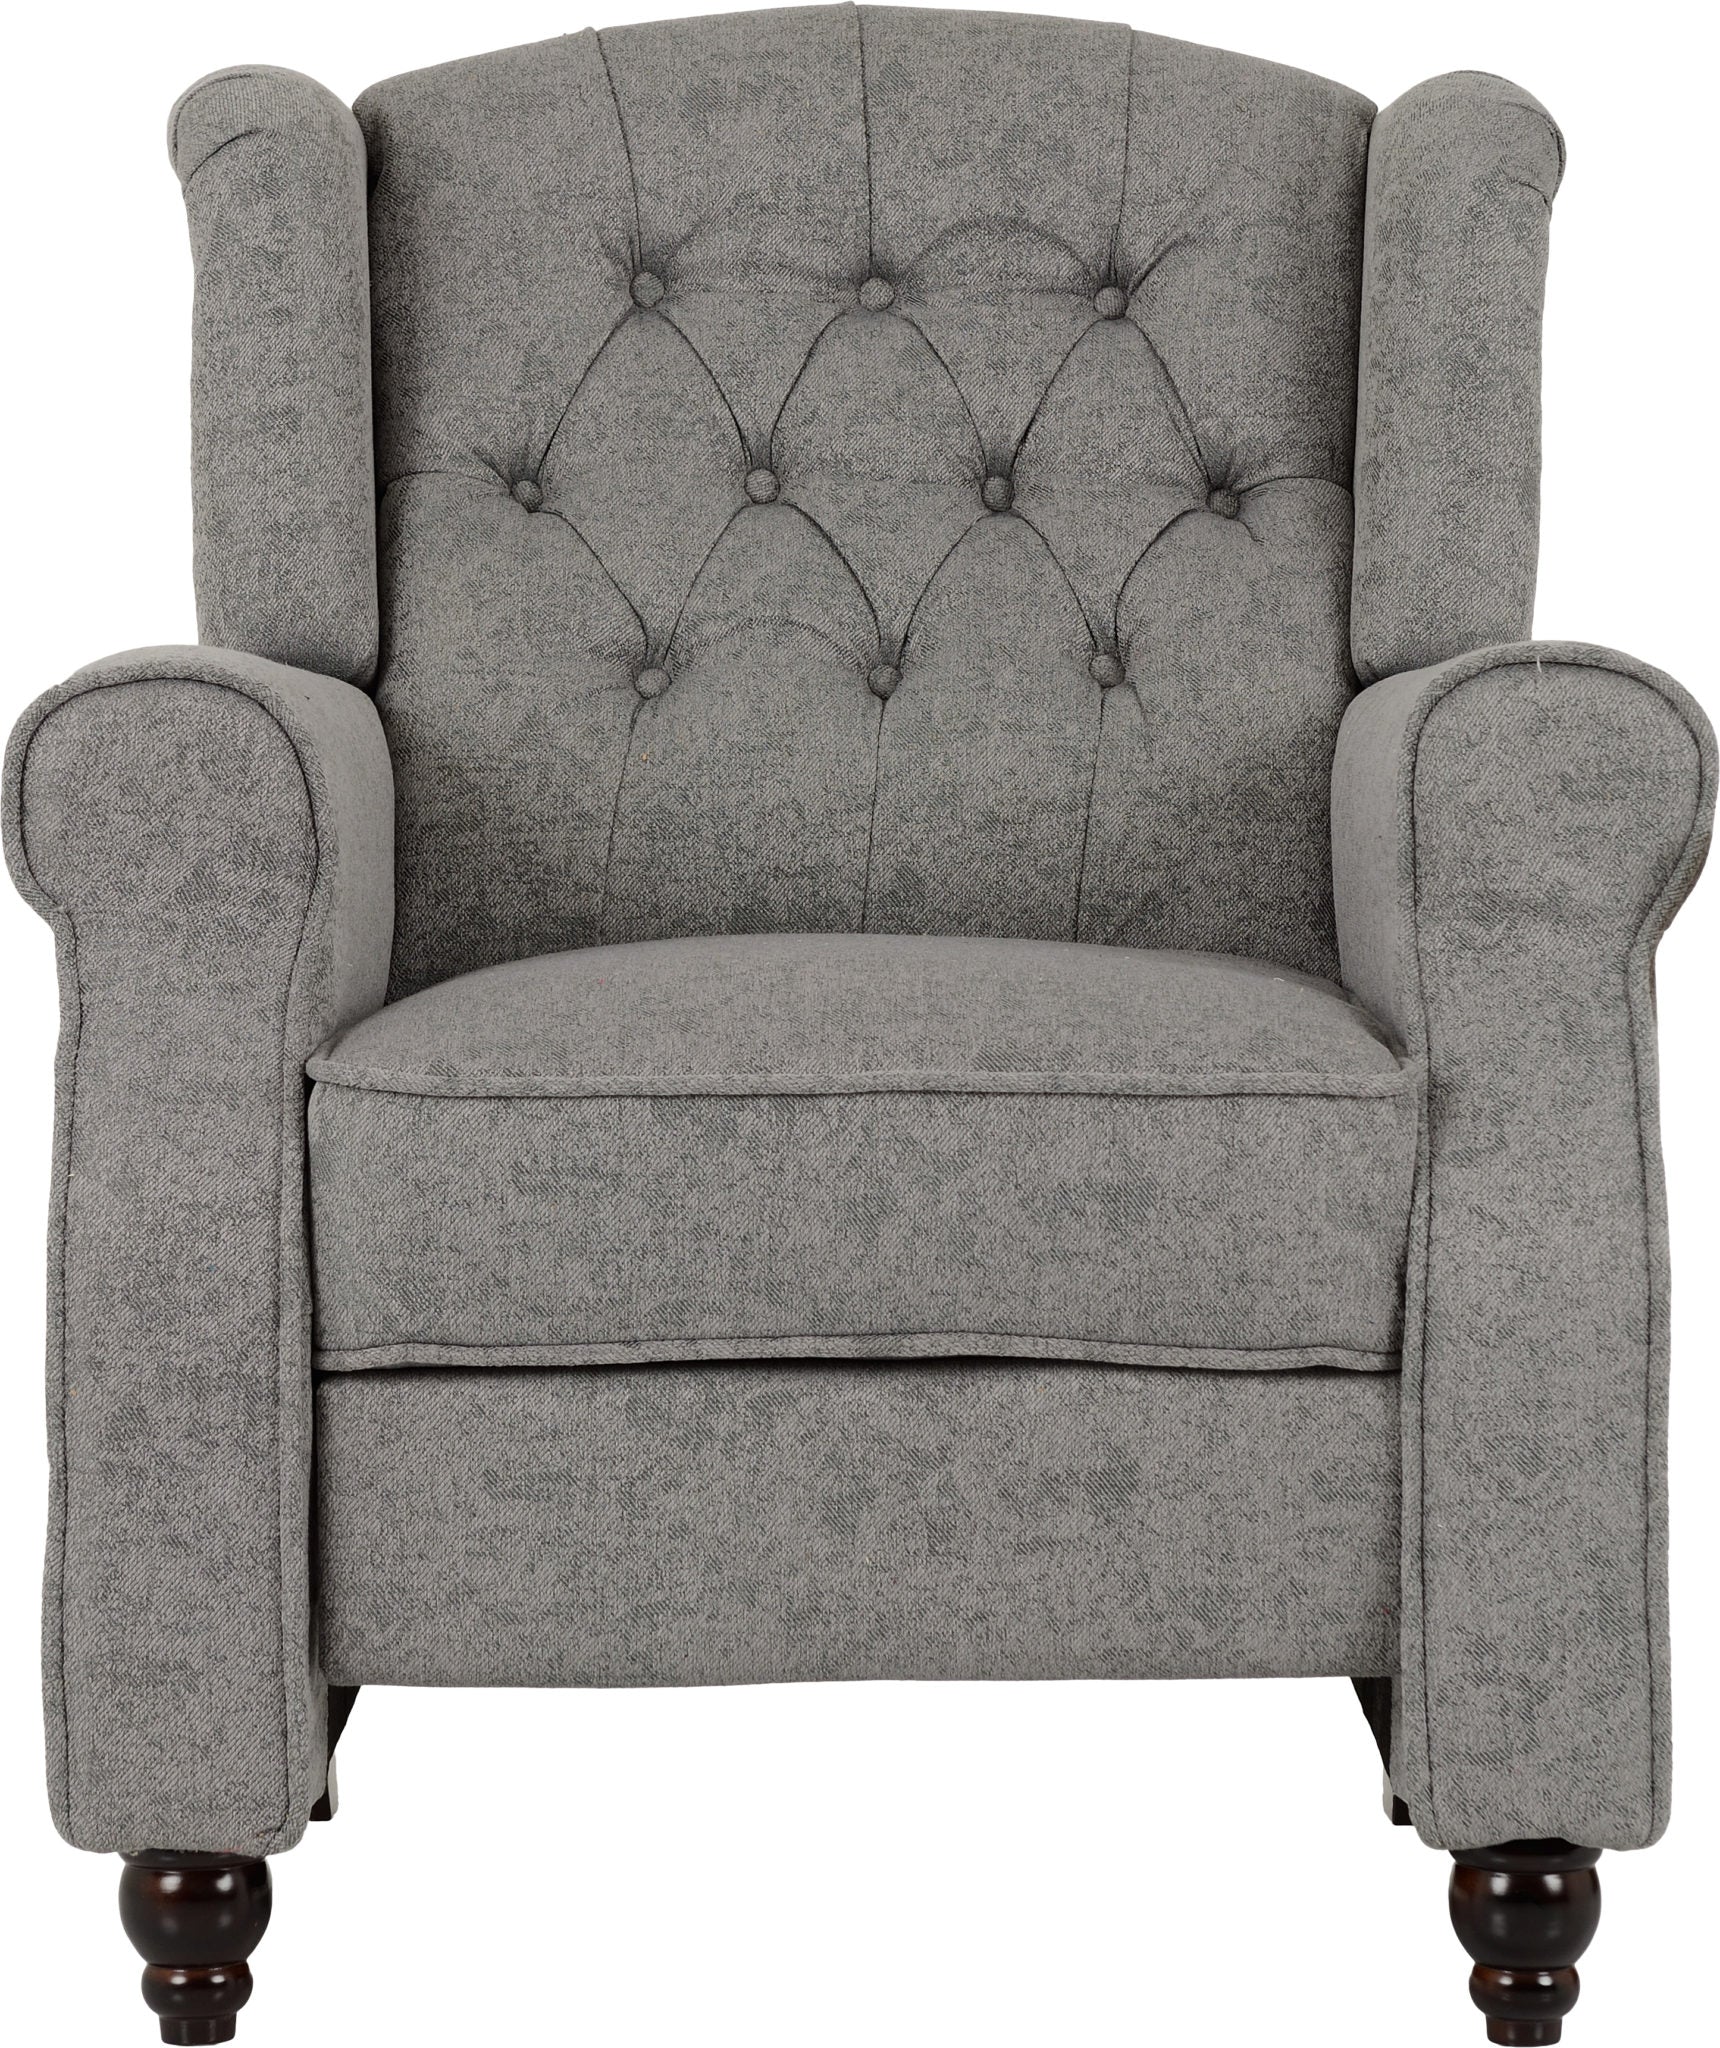 Balmoral Reclining Chair - Grey Fabric- The Right Buy Store